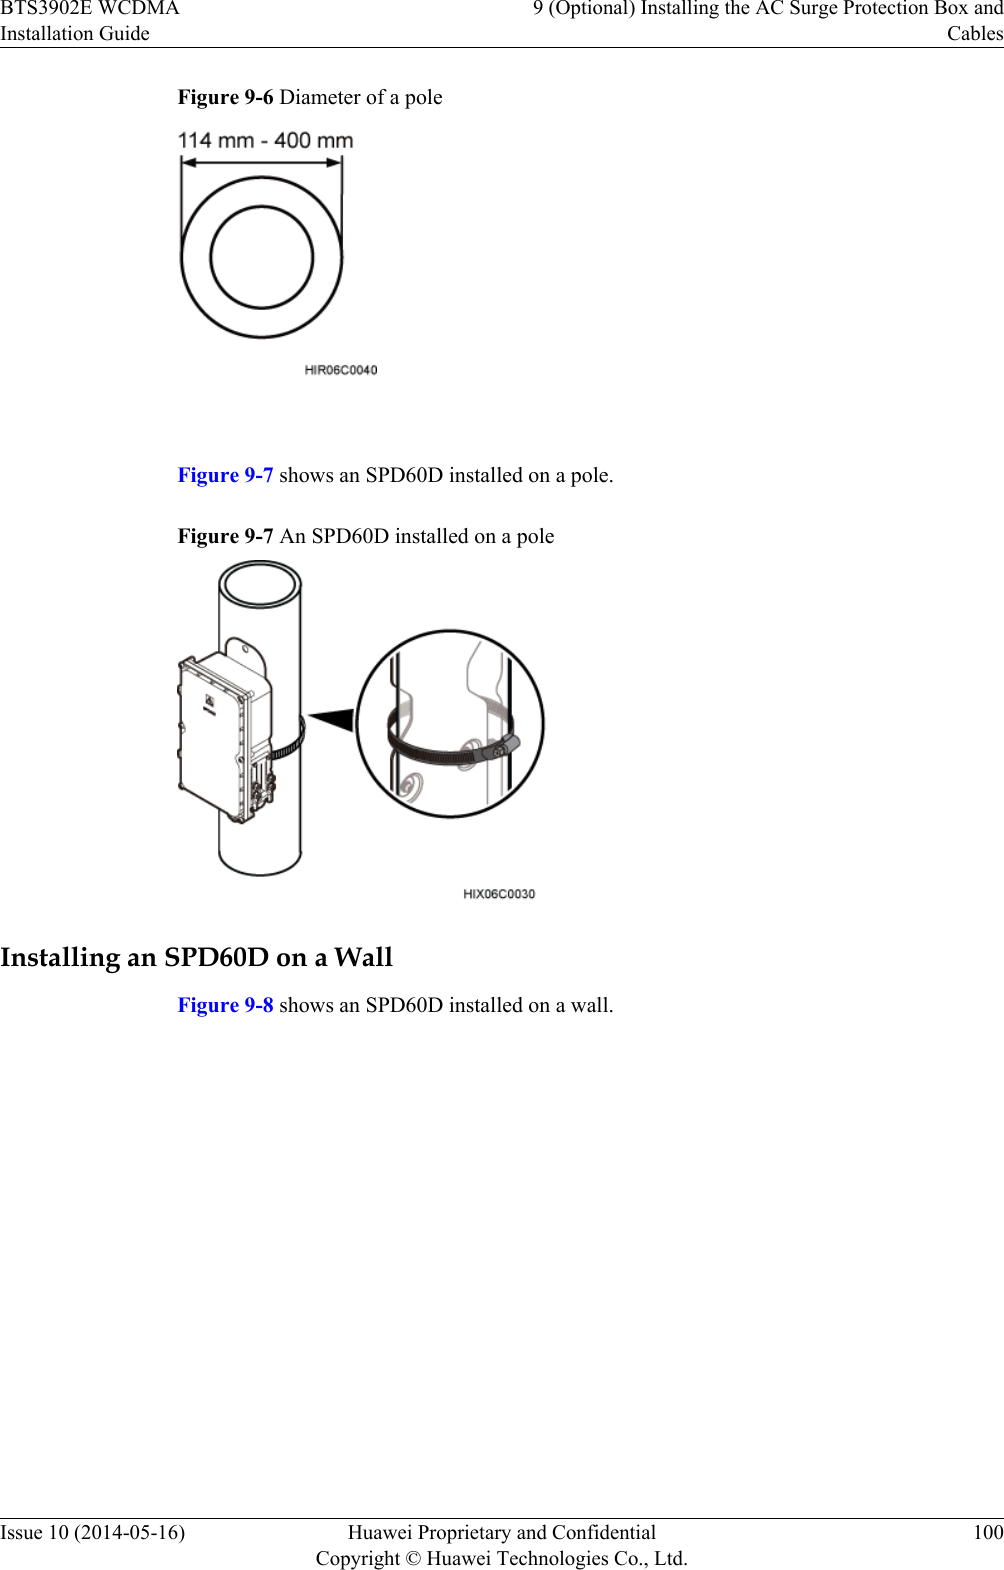 Figure 9-6 Diameter of a pole Figure 9-7 shows an SPD60D installed on a pole.Figure 9-7 An SPD60D installed on a poleInstalling an SPD60D on a WallFigure 9-8 shows an SPD60D installed on a wall.BTS3902E WCDMAInstallation Guide9 (Optional) Installing the AC Surge Protection Box andCablesIssue 10 (2014-05-16) Huawei Proprietary and ConfidentialCopyright © Huawei Technologies Co., Ltd.100